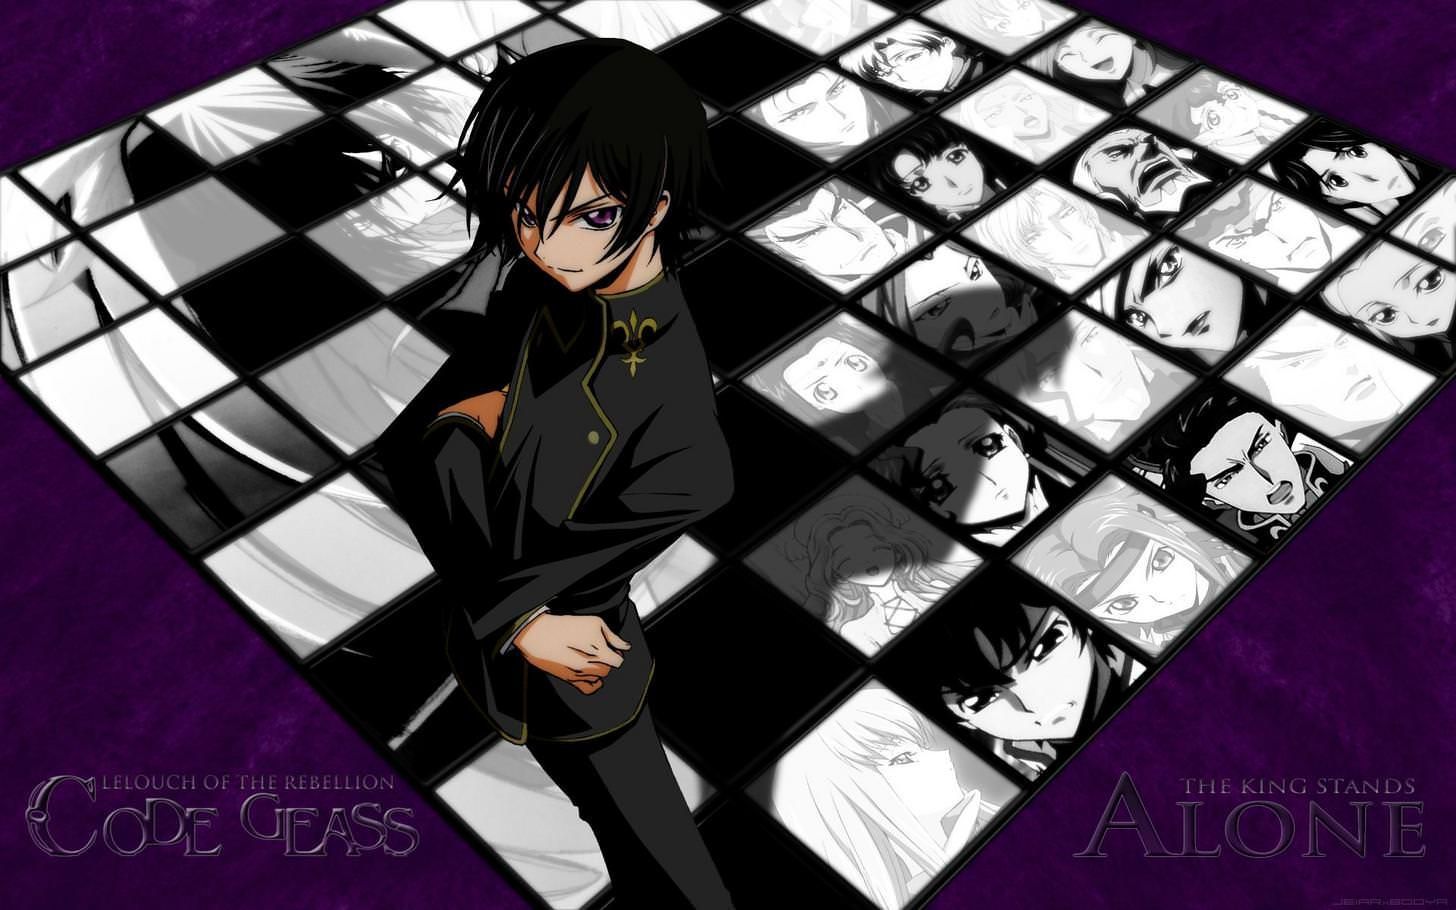 Code Geass wallpaper. Code geass, Code geass wallpaper, Animated wallpaper for mobile